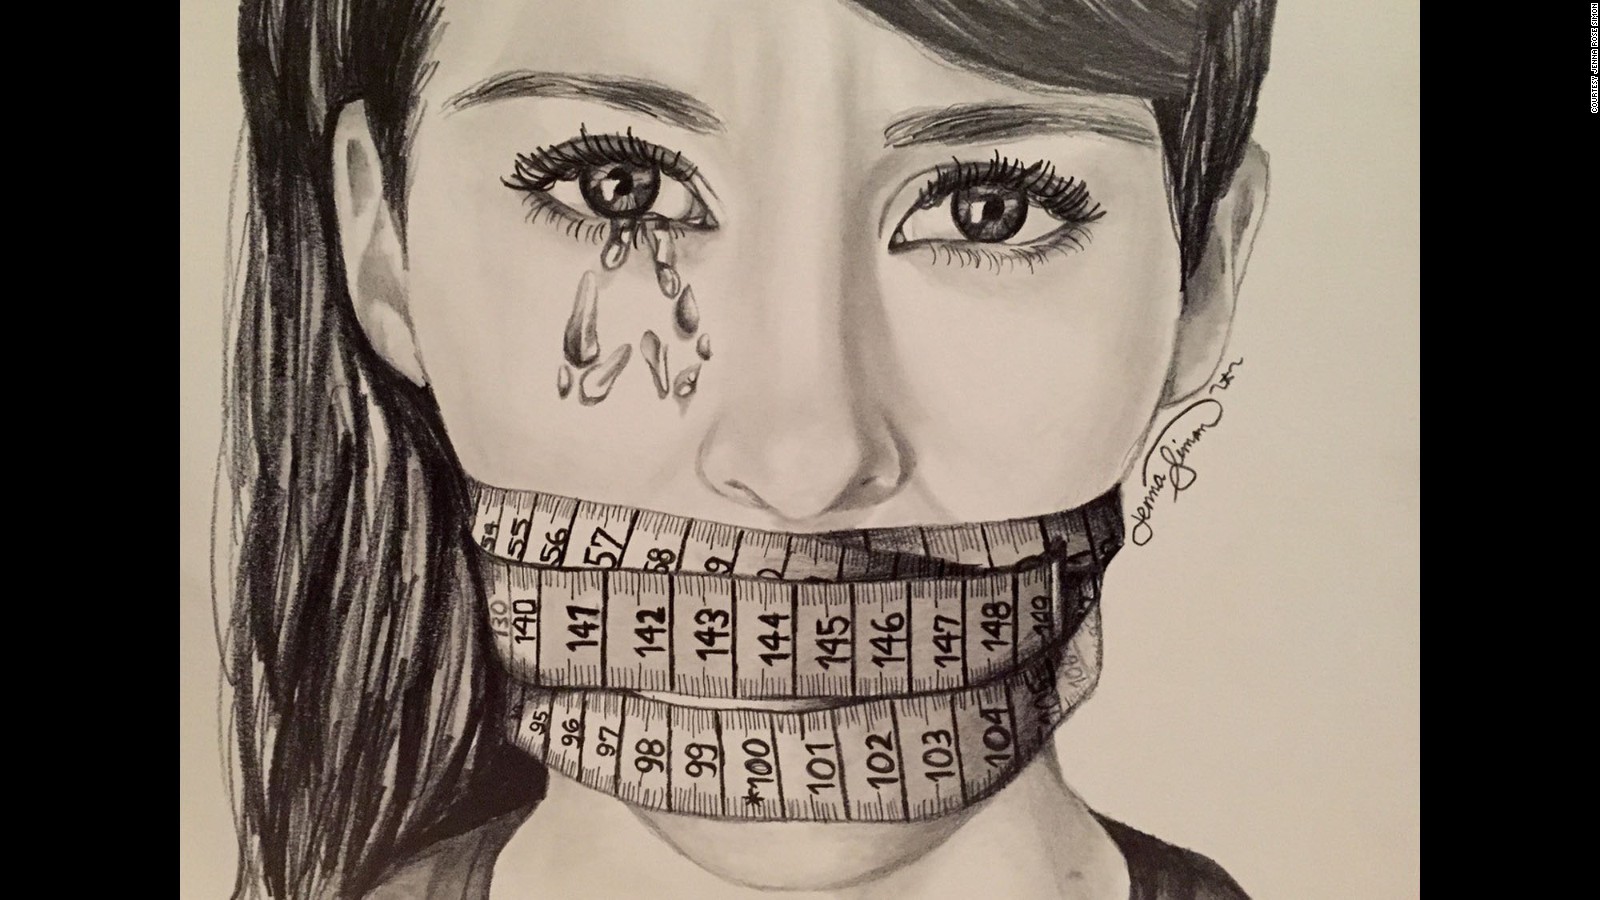 Artist's sketches convey struggles of eating disorder CNN